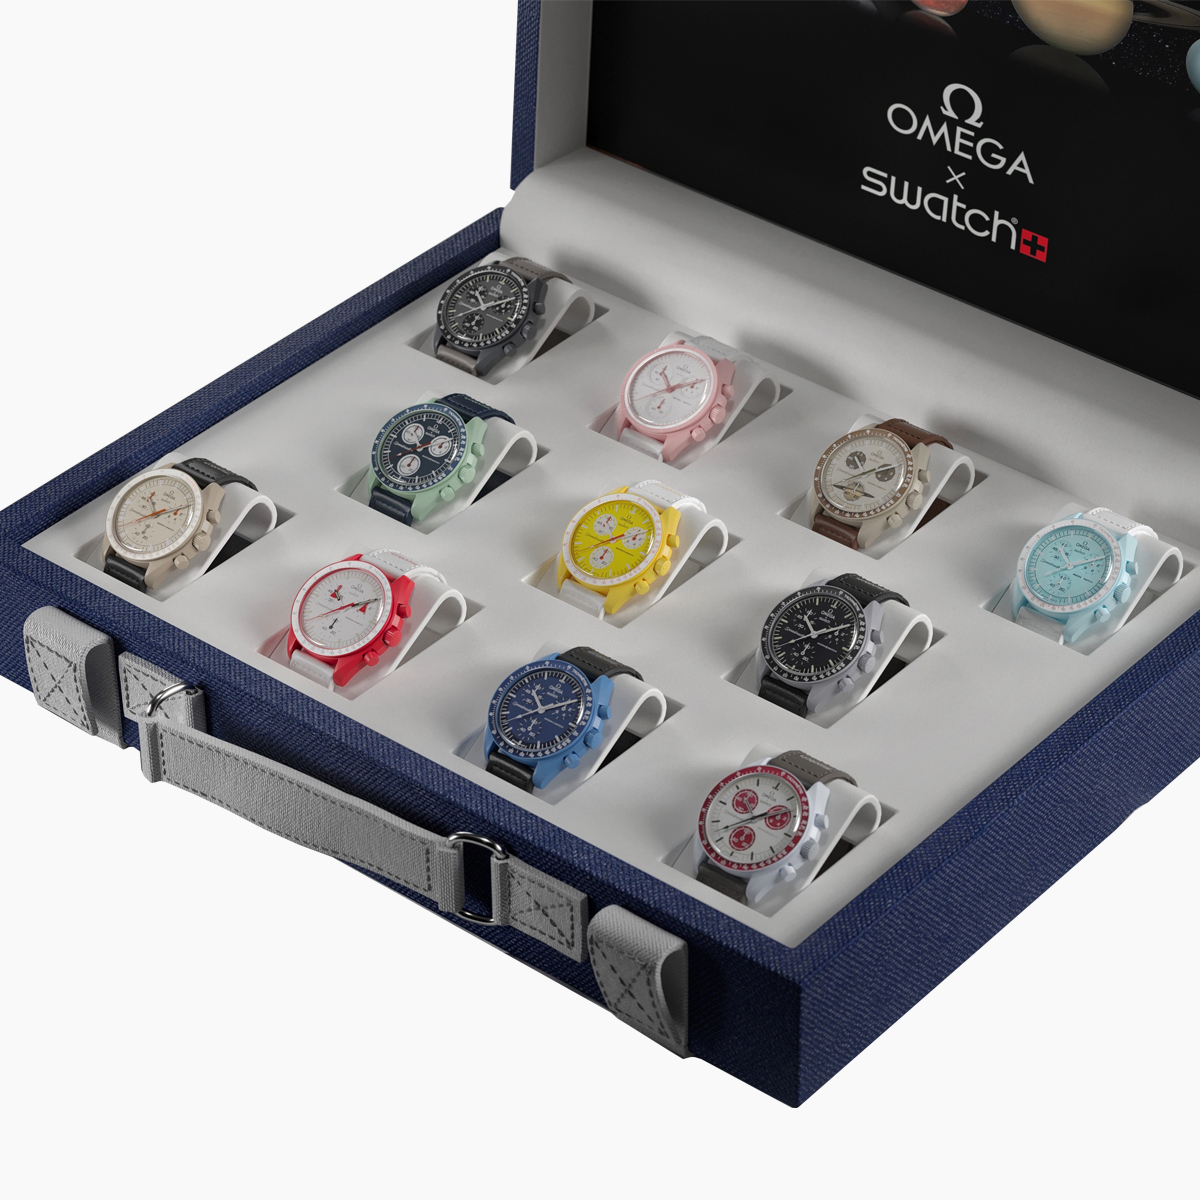 Swatch X Omega MoonSwatch Full collection Briefcase 3D model https://p.turbosquid.com/ts-thumb/xB/Mdg5lL/qV/1200/jpg/1650916518/1920x1080/fit_q87/29c3aebc884fd093b1cd3508e4412c691c8ca1fe/1200.jpg